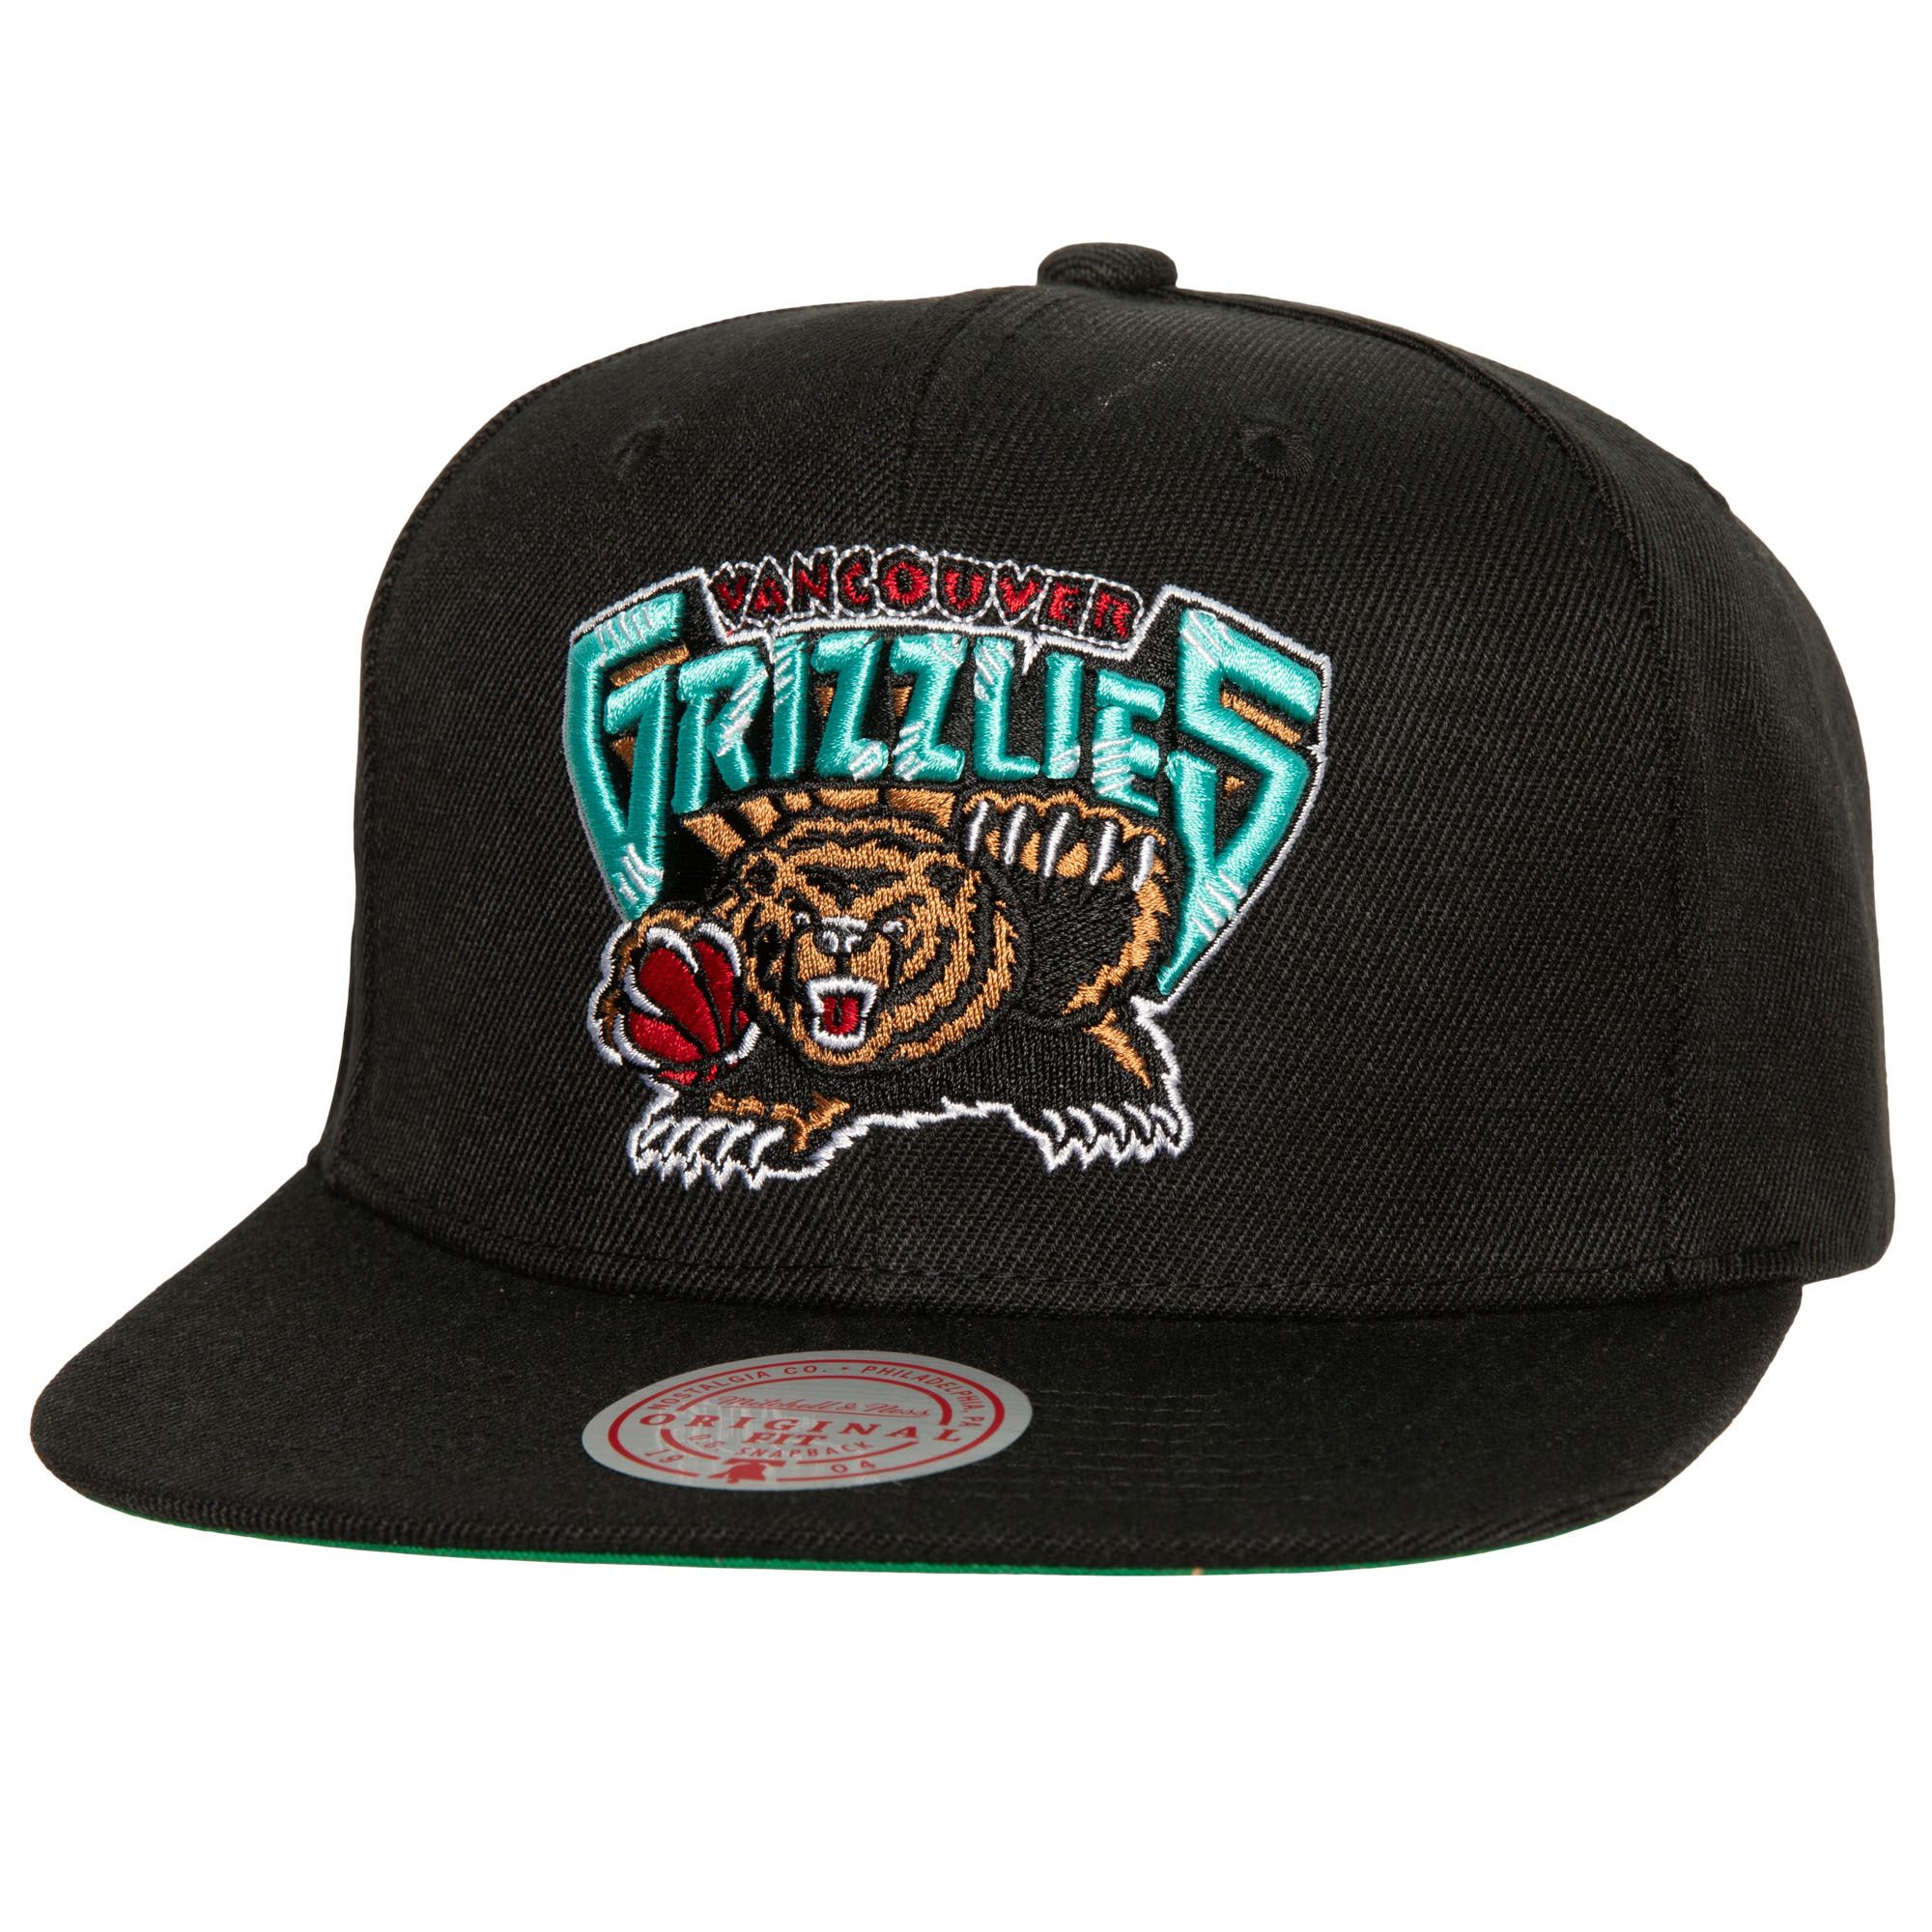 MITCHELL & NESS SIDE JAM SNAPBACK VANCOUVER GRIZZLIES | CROSSOVER RICCIONE